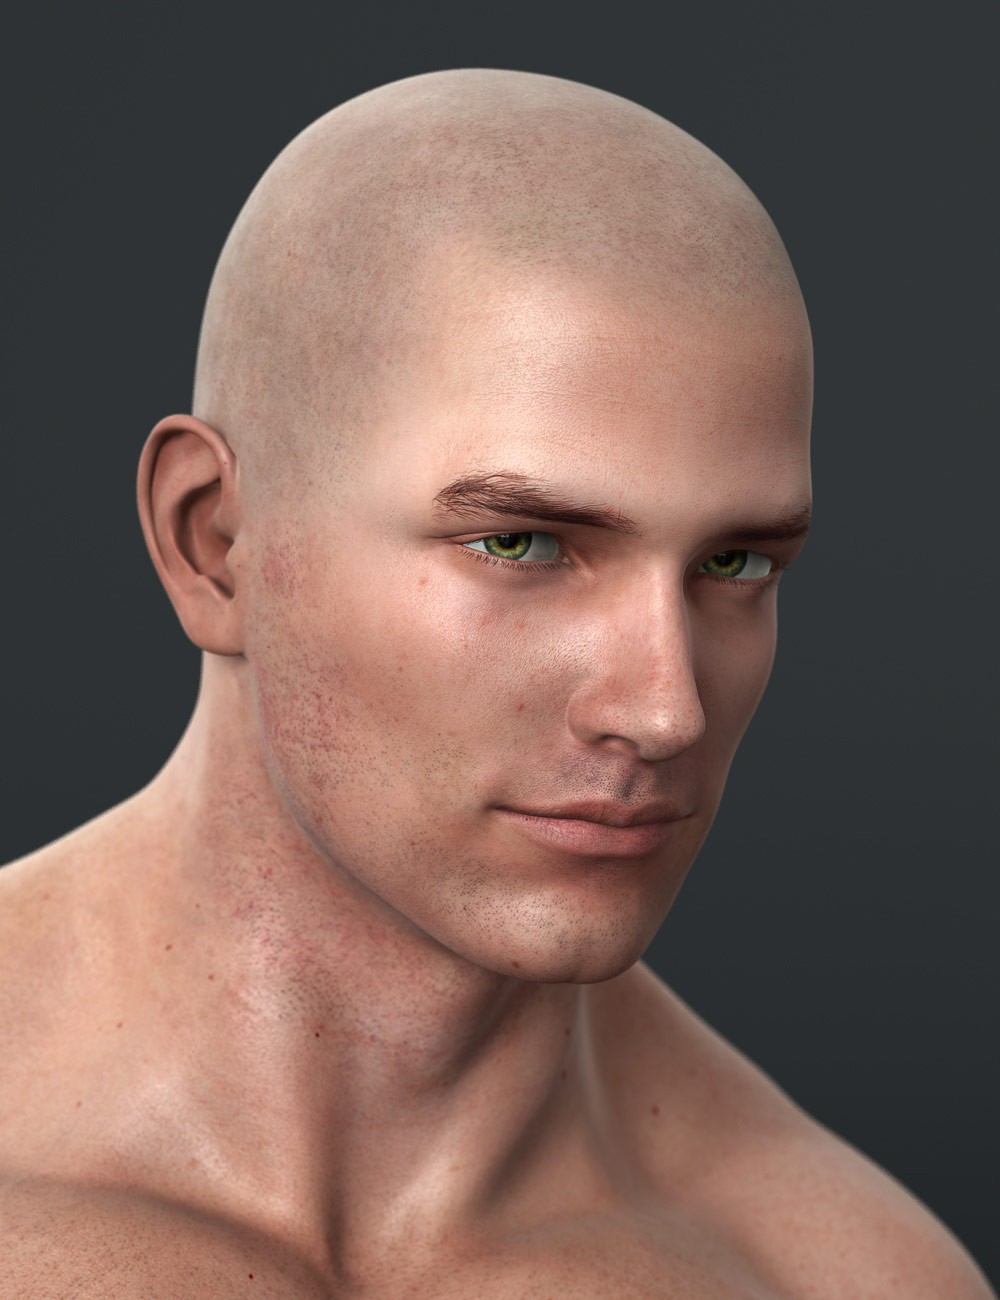 Figure Poses For Artists: Male Poser Head Shots